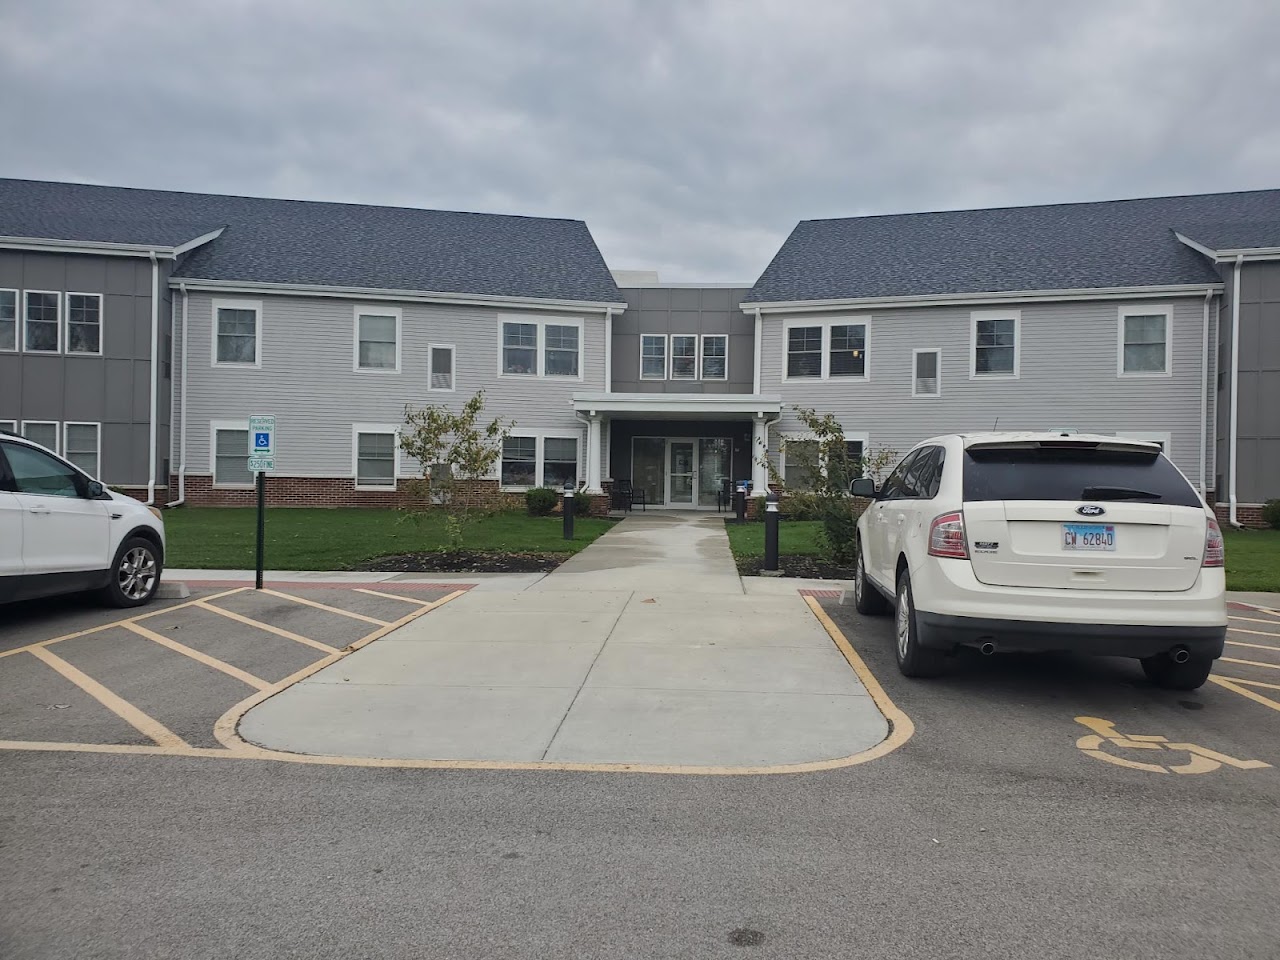 Photo of ALTAMONT SENIOR RESIDENCES. Affordable housing located at 406 506 EAST CUMBERLAND ROAD ALTAMONT, IL 62411